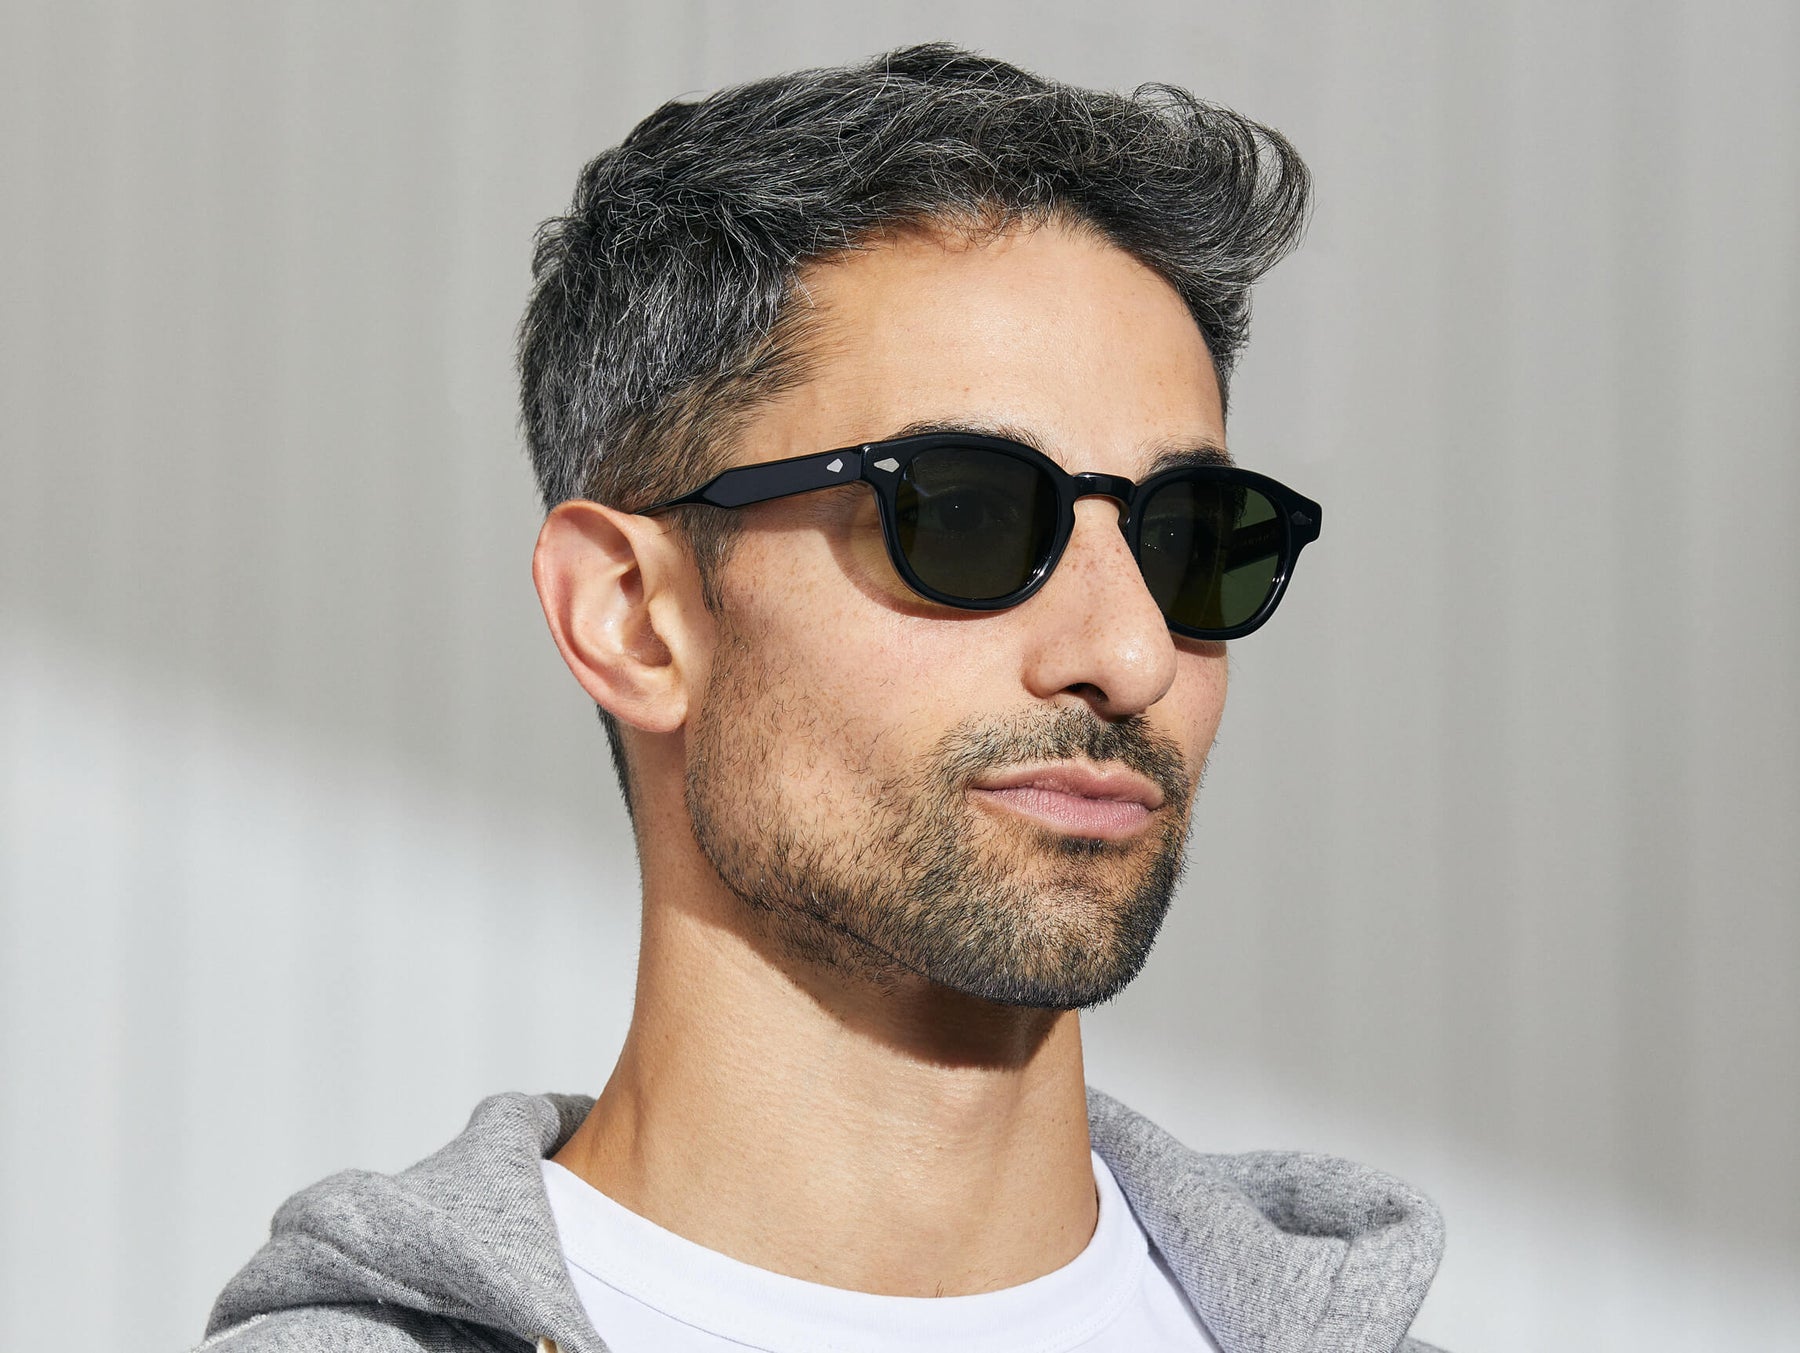 Model is wearing The LEMTOSH SPORT in Black in size 46 with G-15 Polarized Nylon Lenses